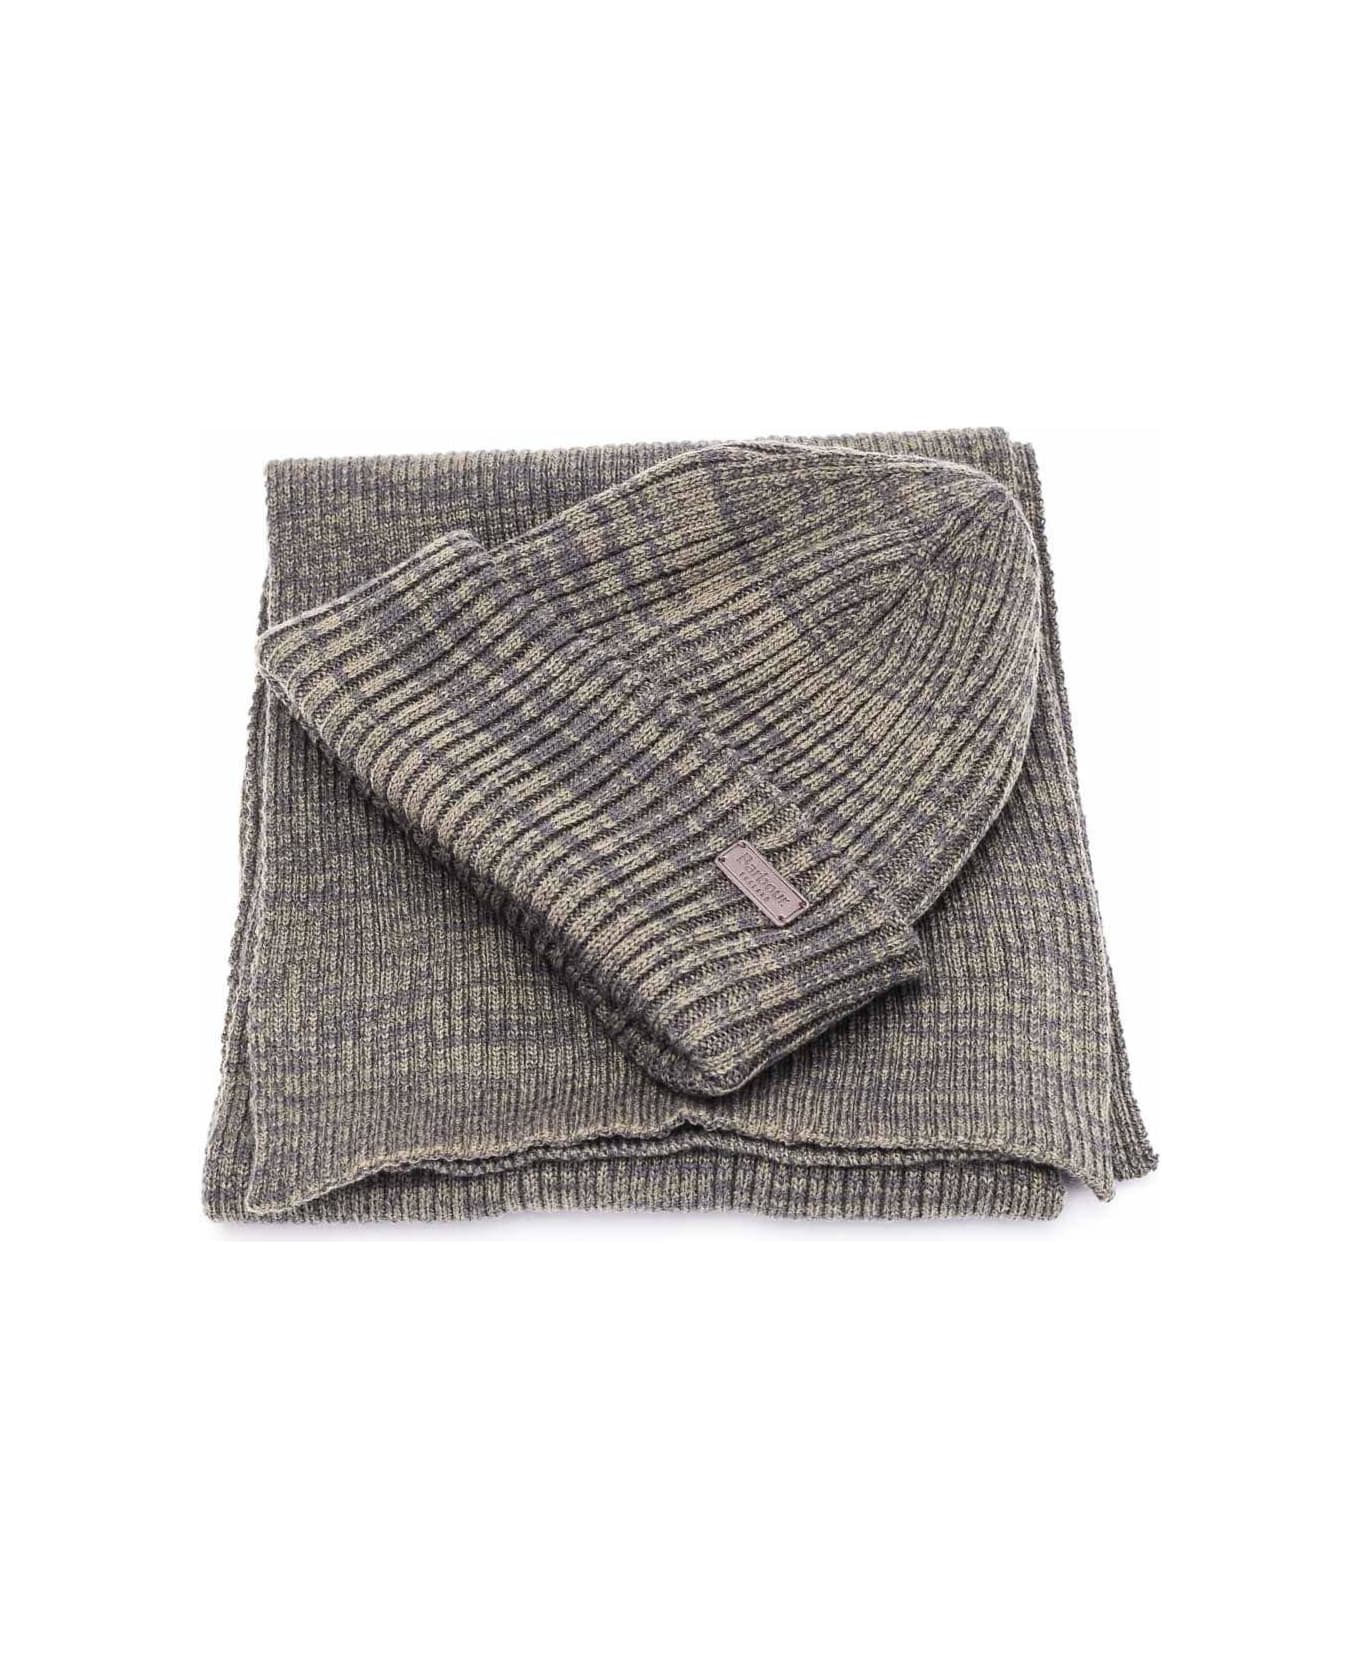 Barbour Scarf And Beanie Set - Olive Twist スカーフ